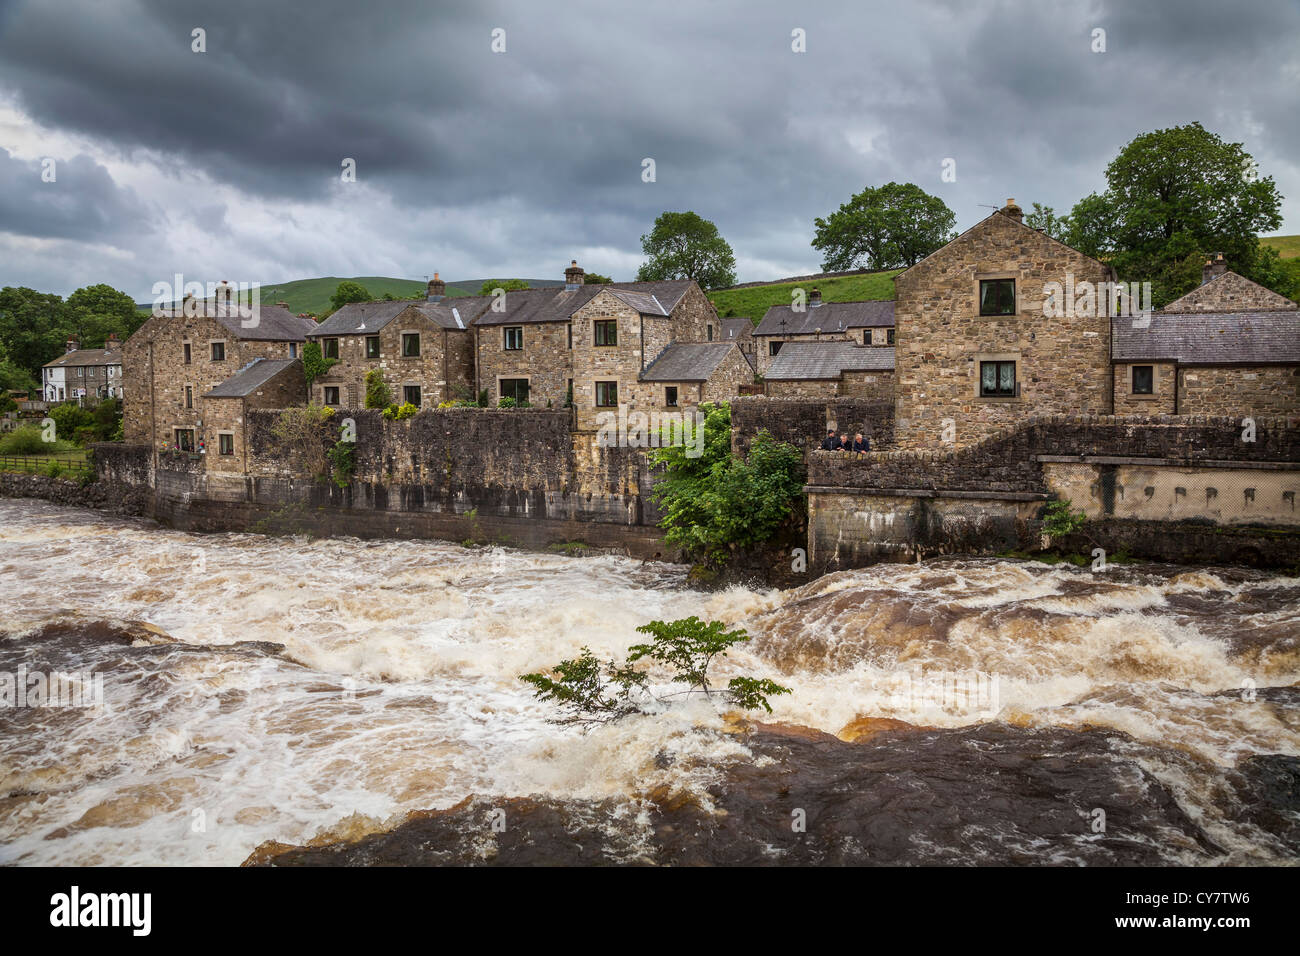 The river Wharf at Linton Falls after heavy rain, North Yorkshire. Stock Photo